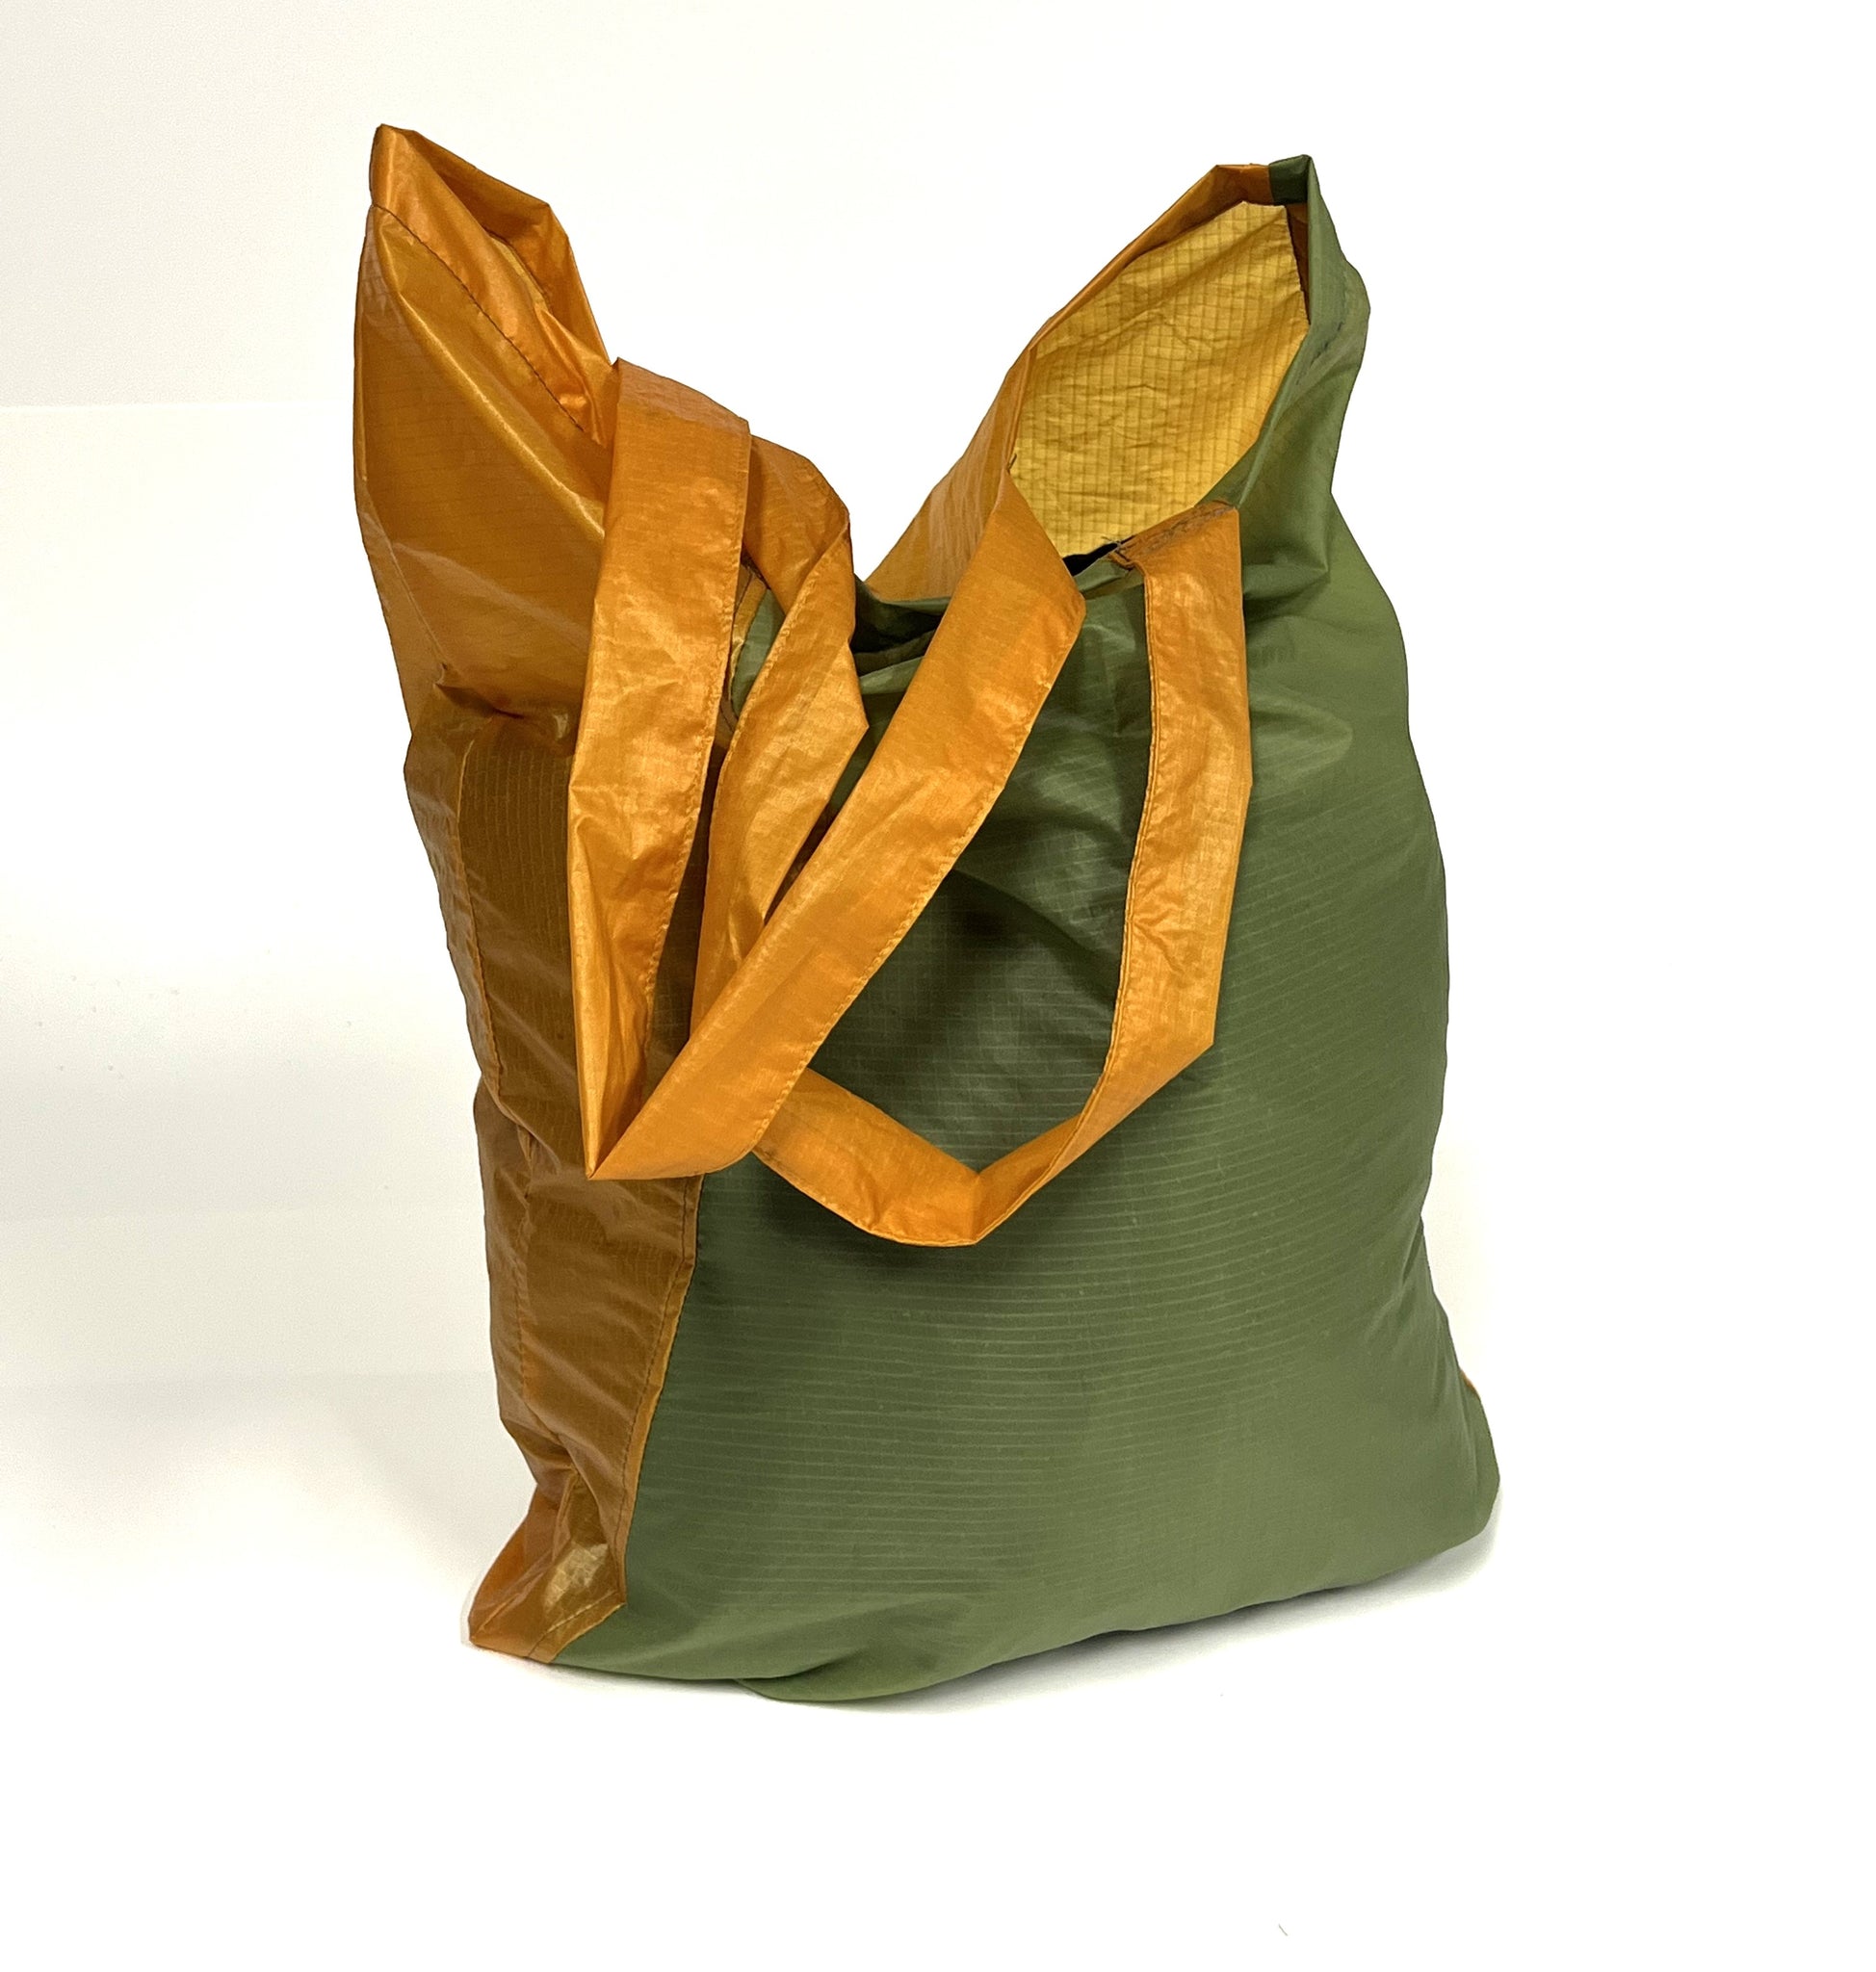 Green & yellow R4 Market Bag on a white background